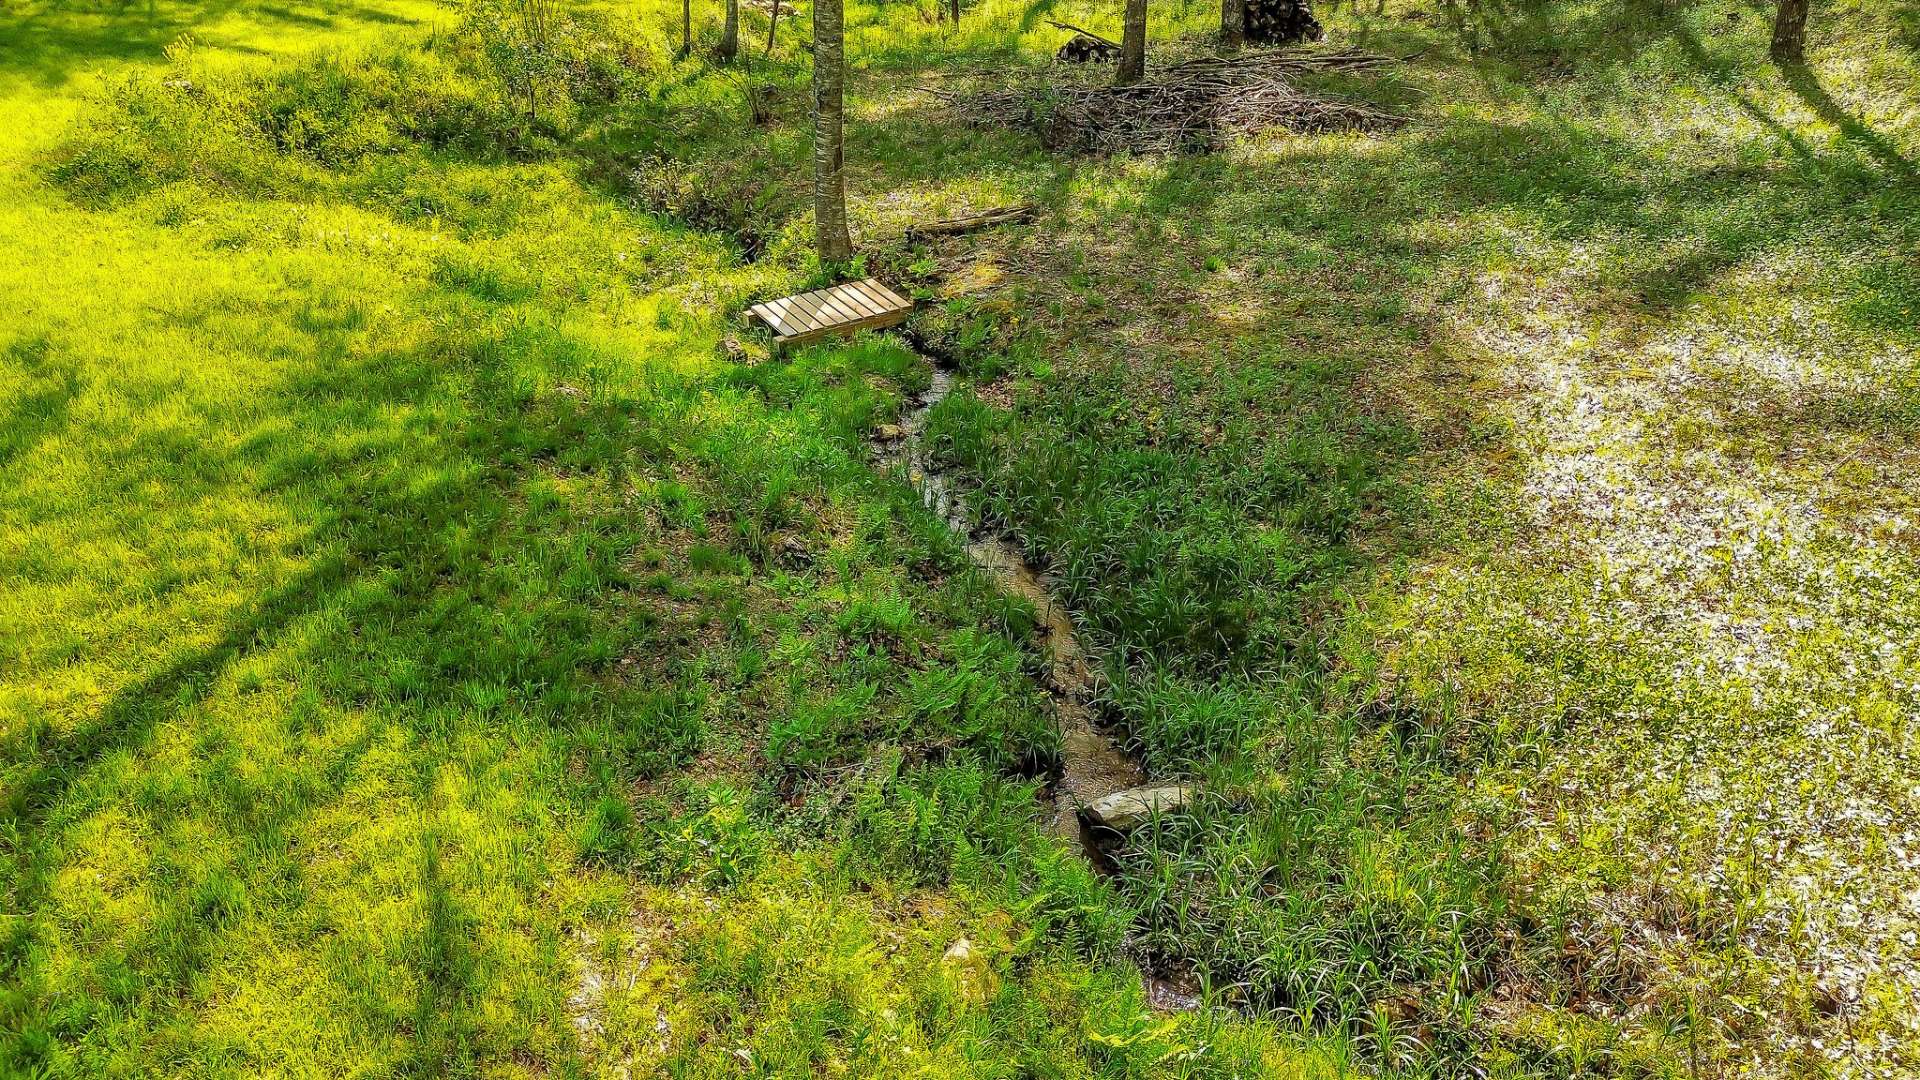 The small mountain stream is spring-fed.